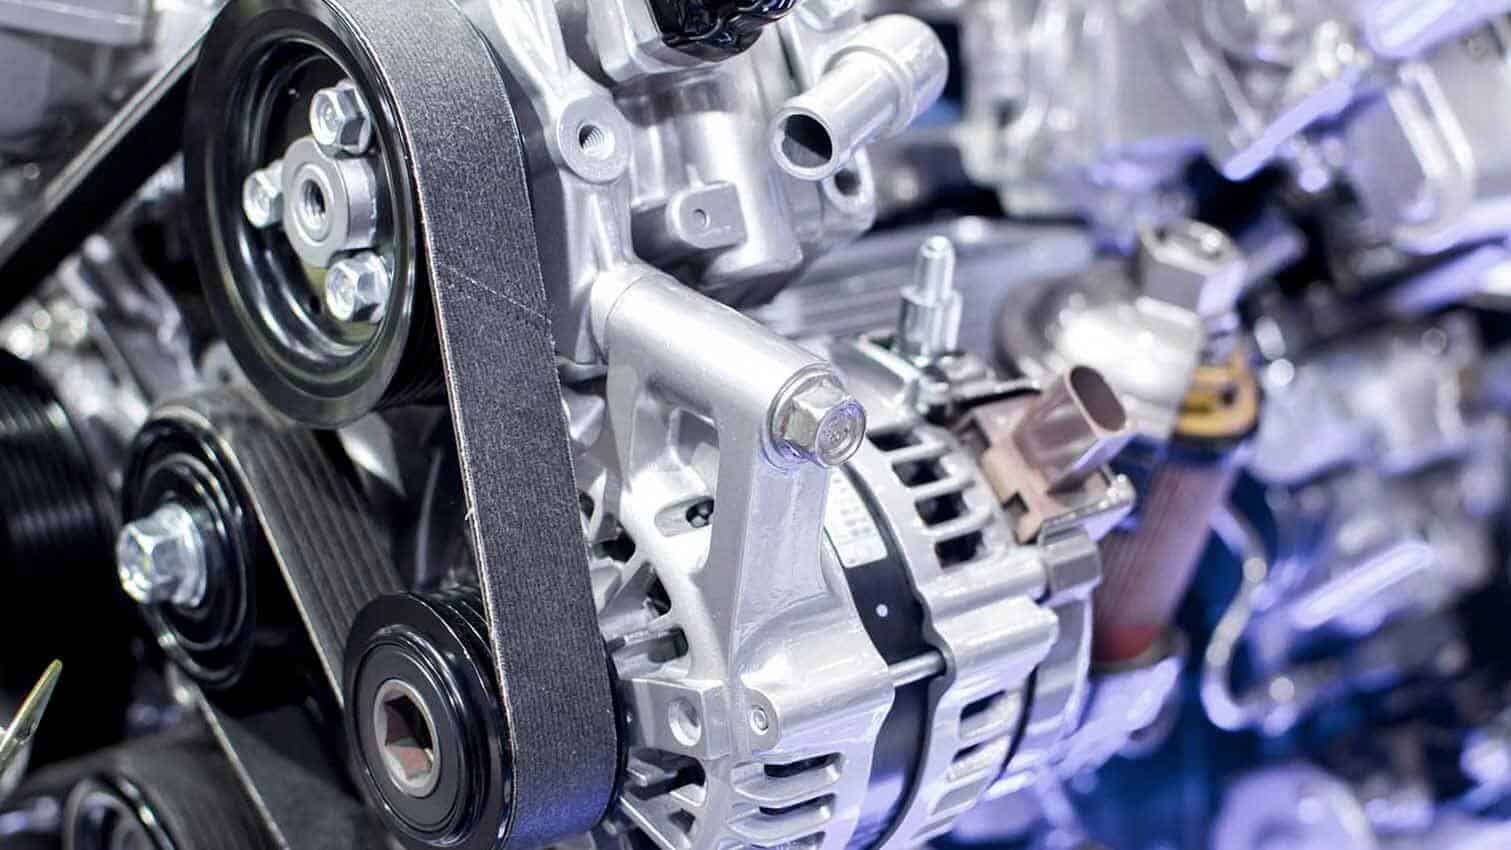 Serpentine Belt Replacement Cost and Guide - Uchanics: Auto Repair